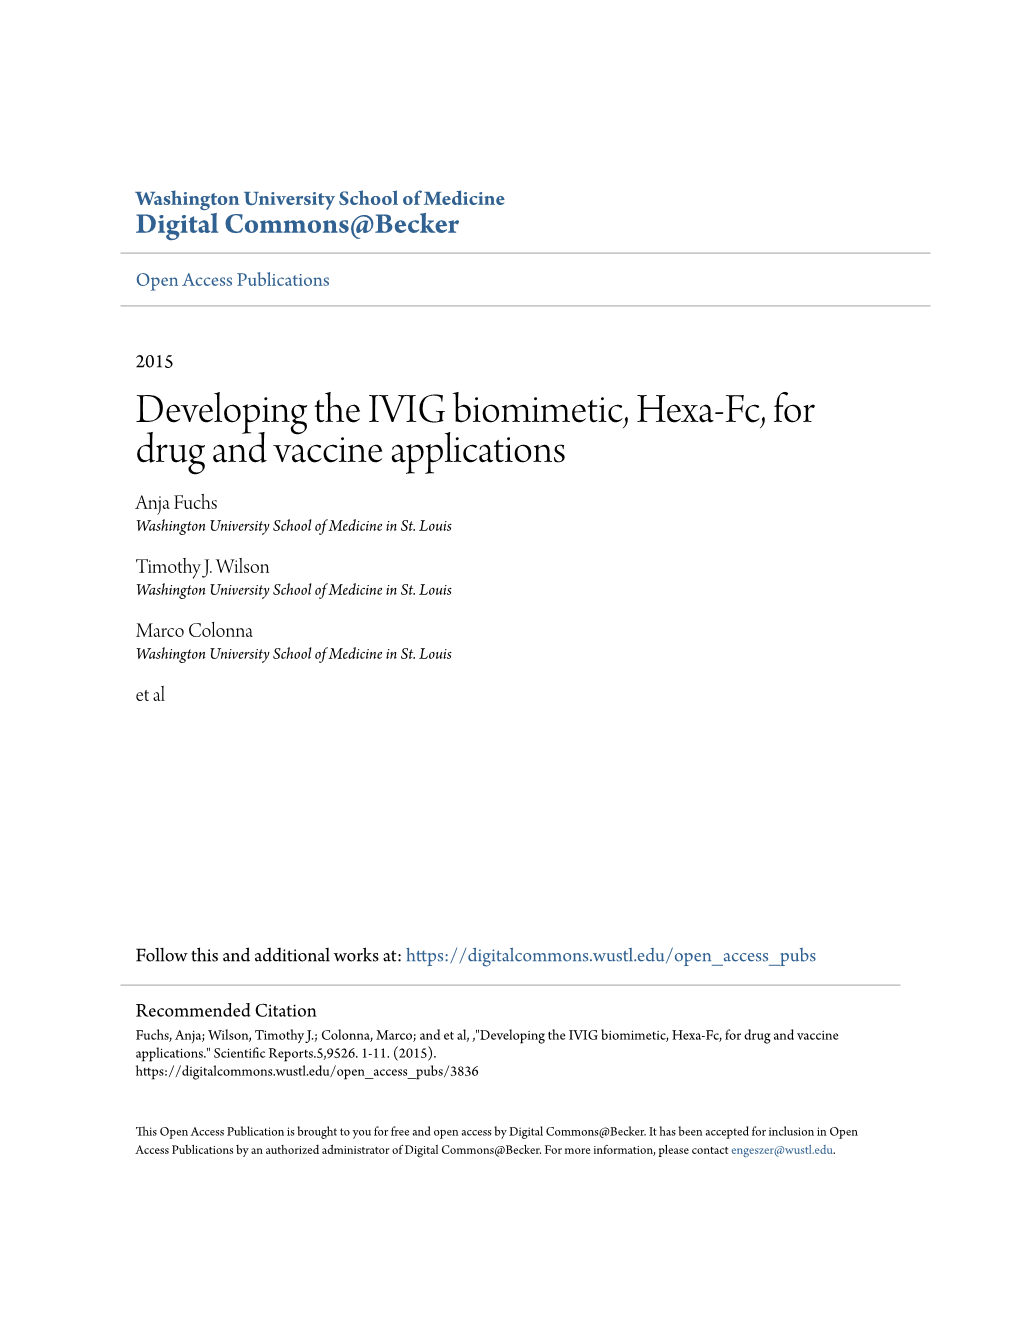 Developing the IVIG Biomimetic, Hexa-Fc, for Drug and Vaccine Applications Anja Fuchs Washington University School of Medicine in St